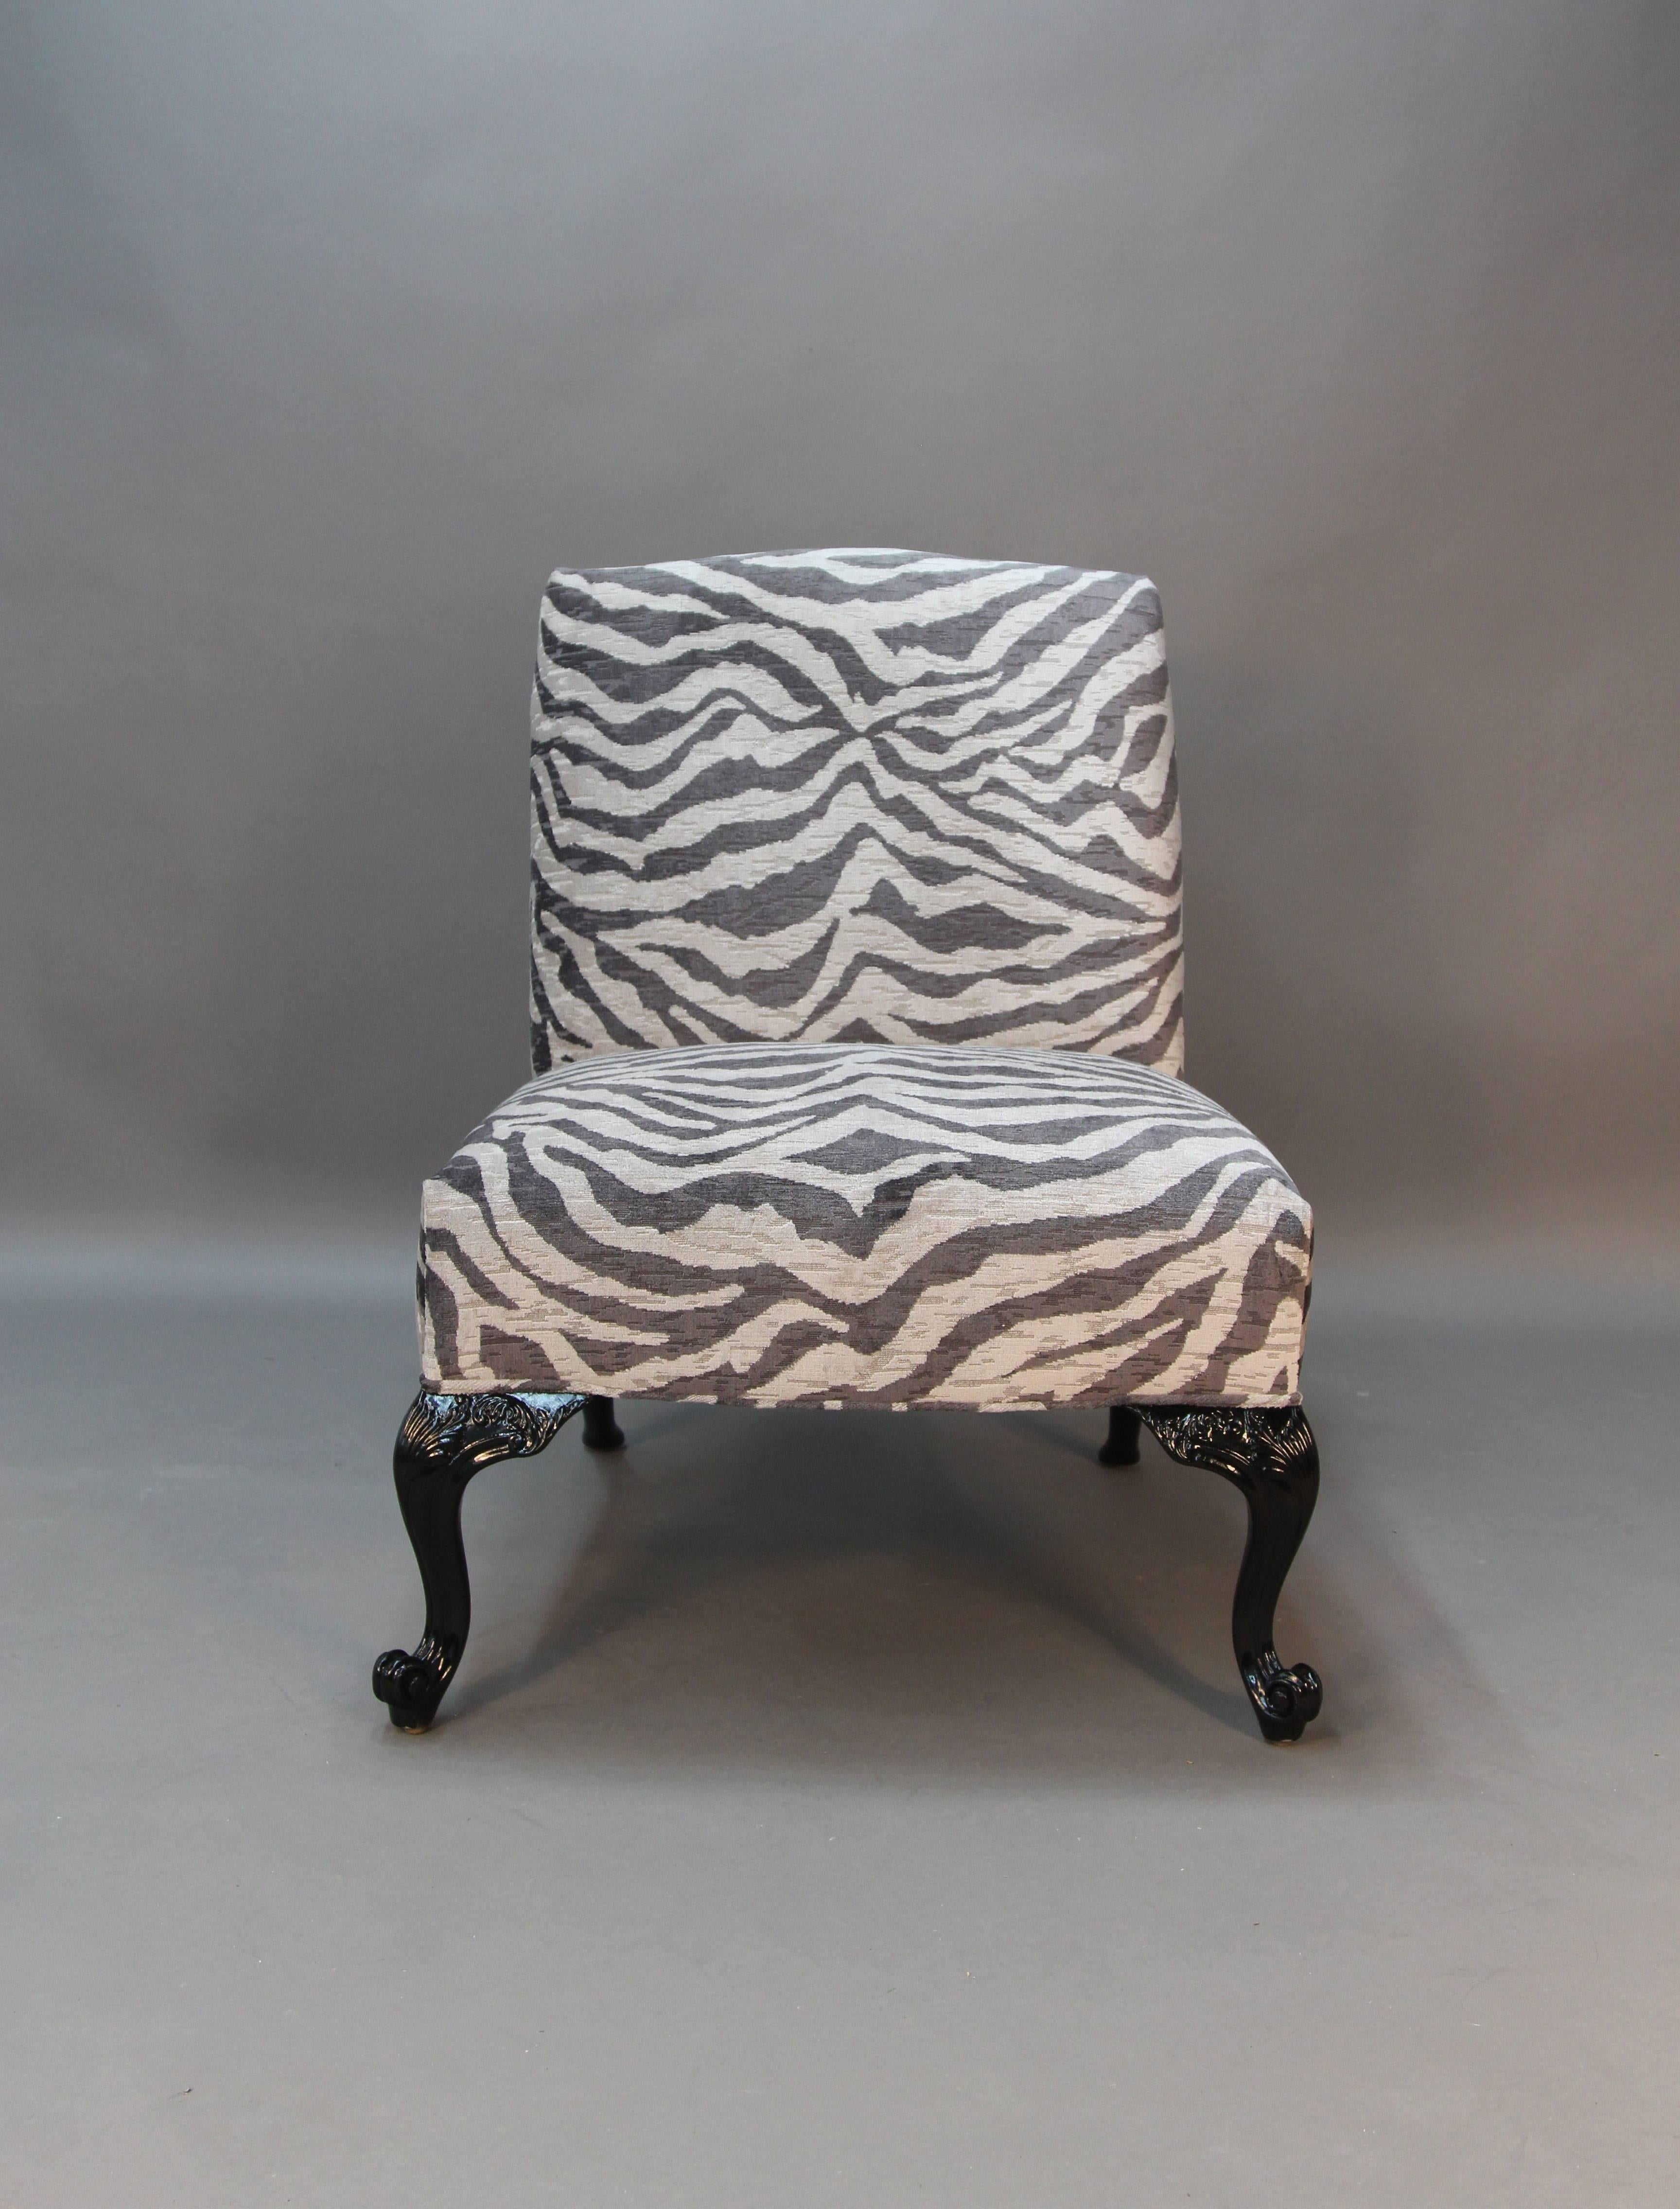 A more modern twist on a traditional pair of chairs. The frames are newly lacquered and the seats have been newly upholstered in zebra print grey tone fabric.